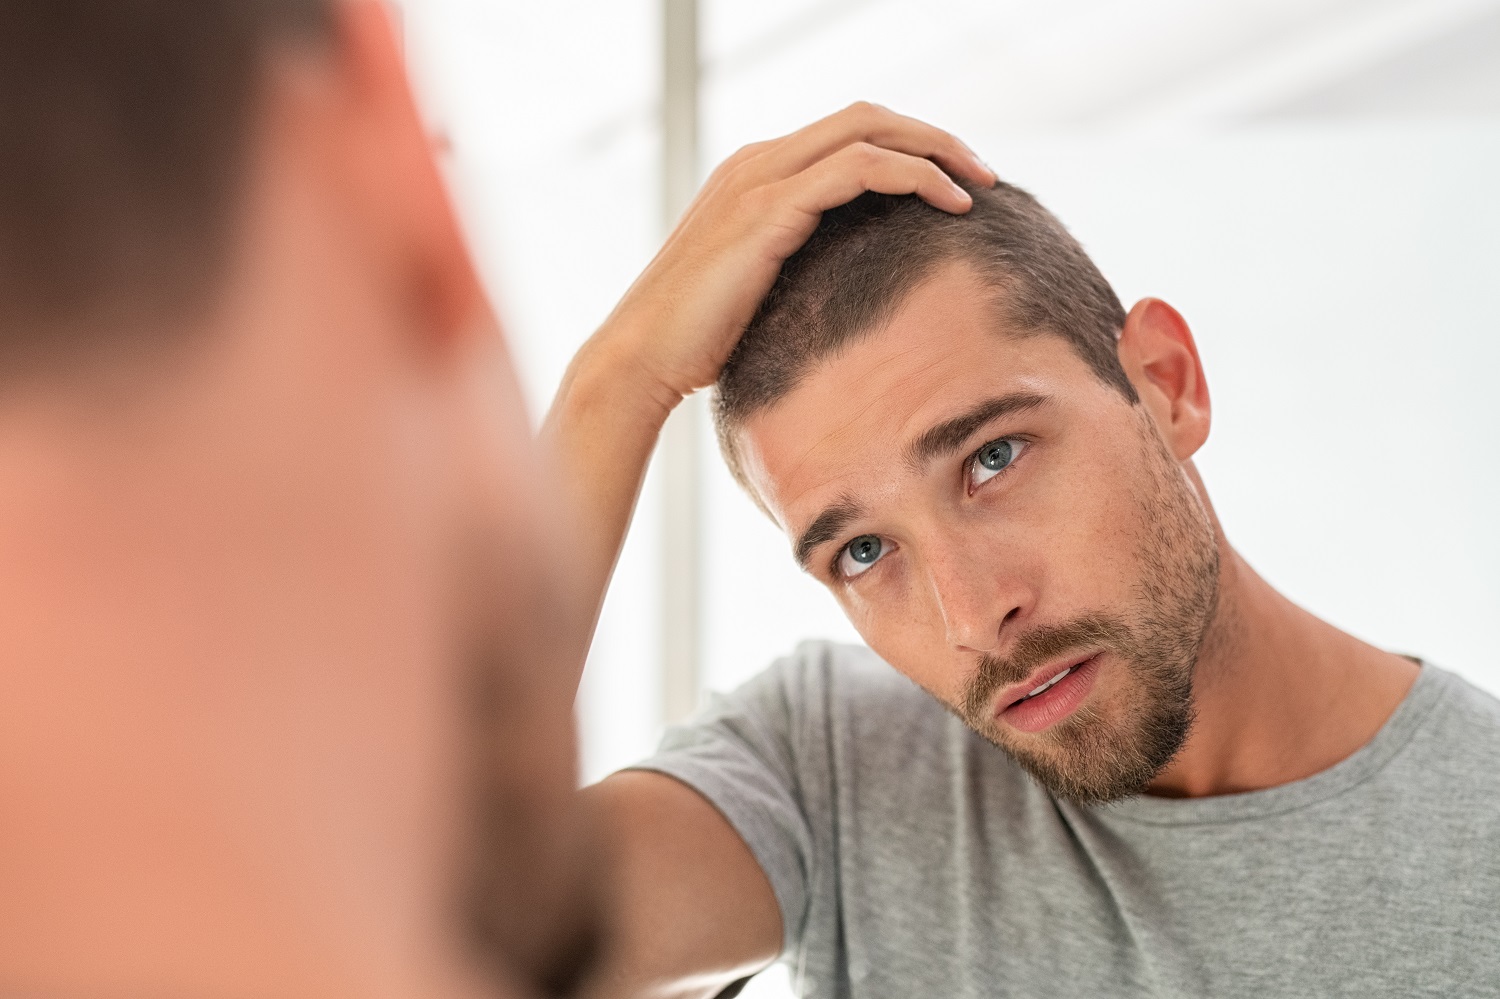 Hairline Surgery vs Hair Transplant: Which is Right for You?